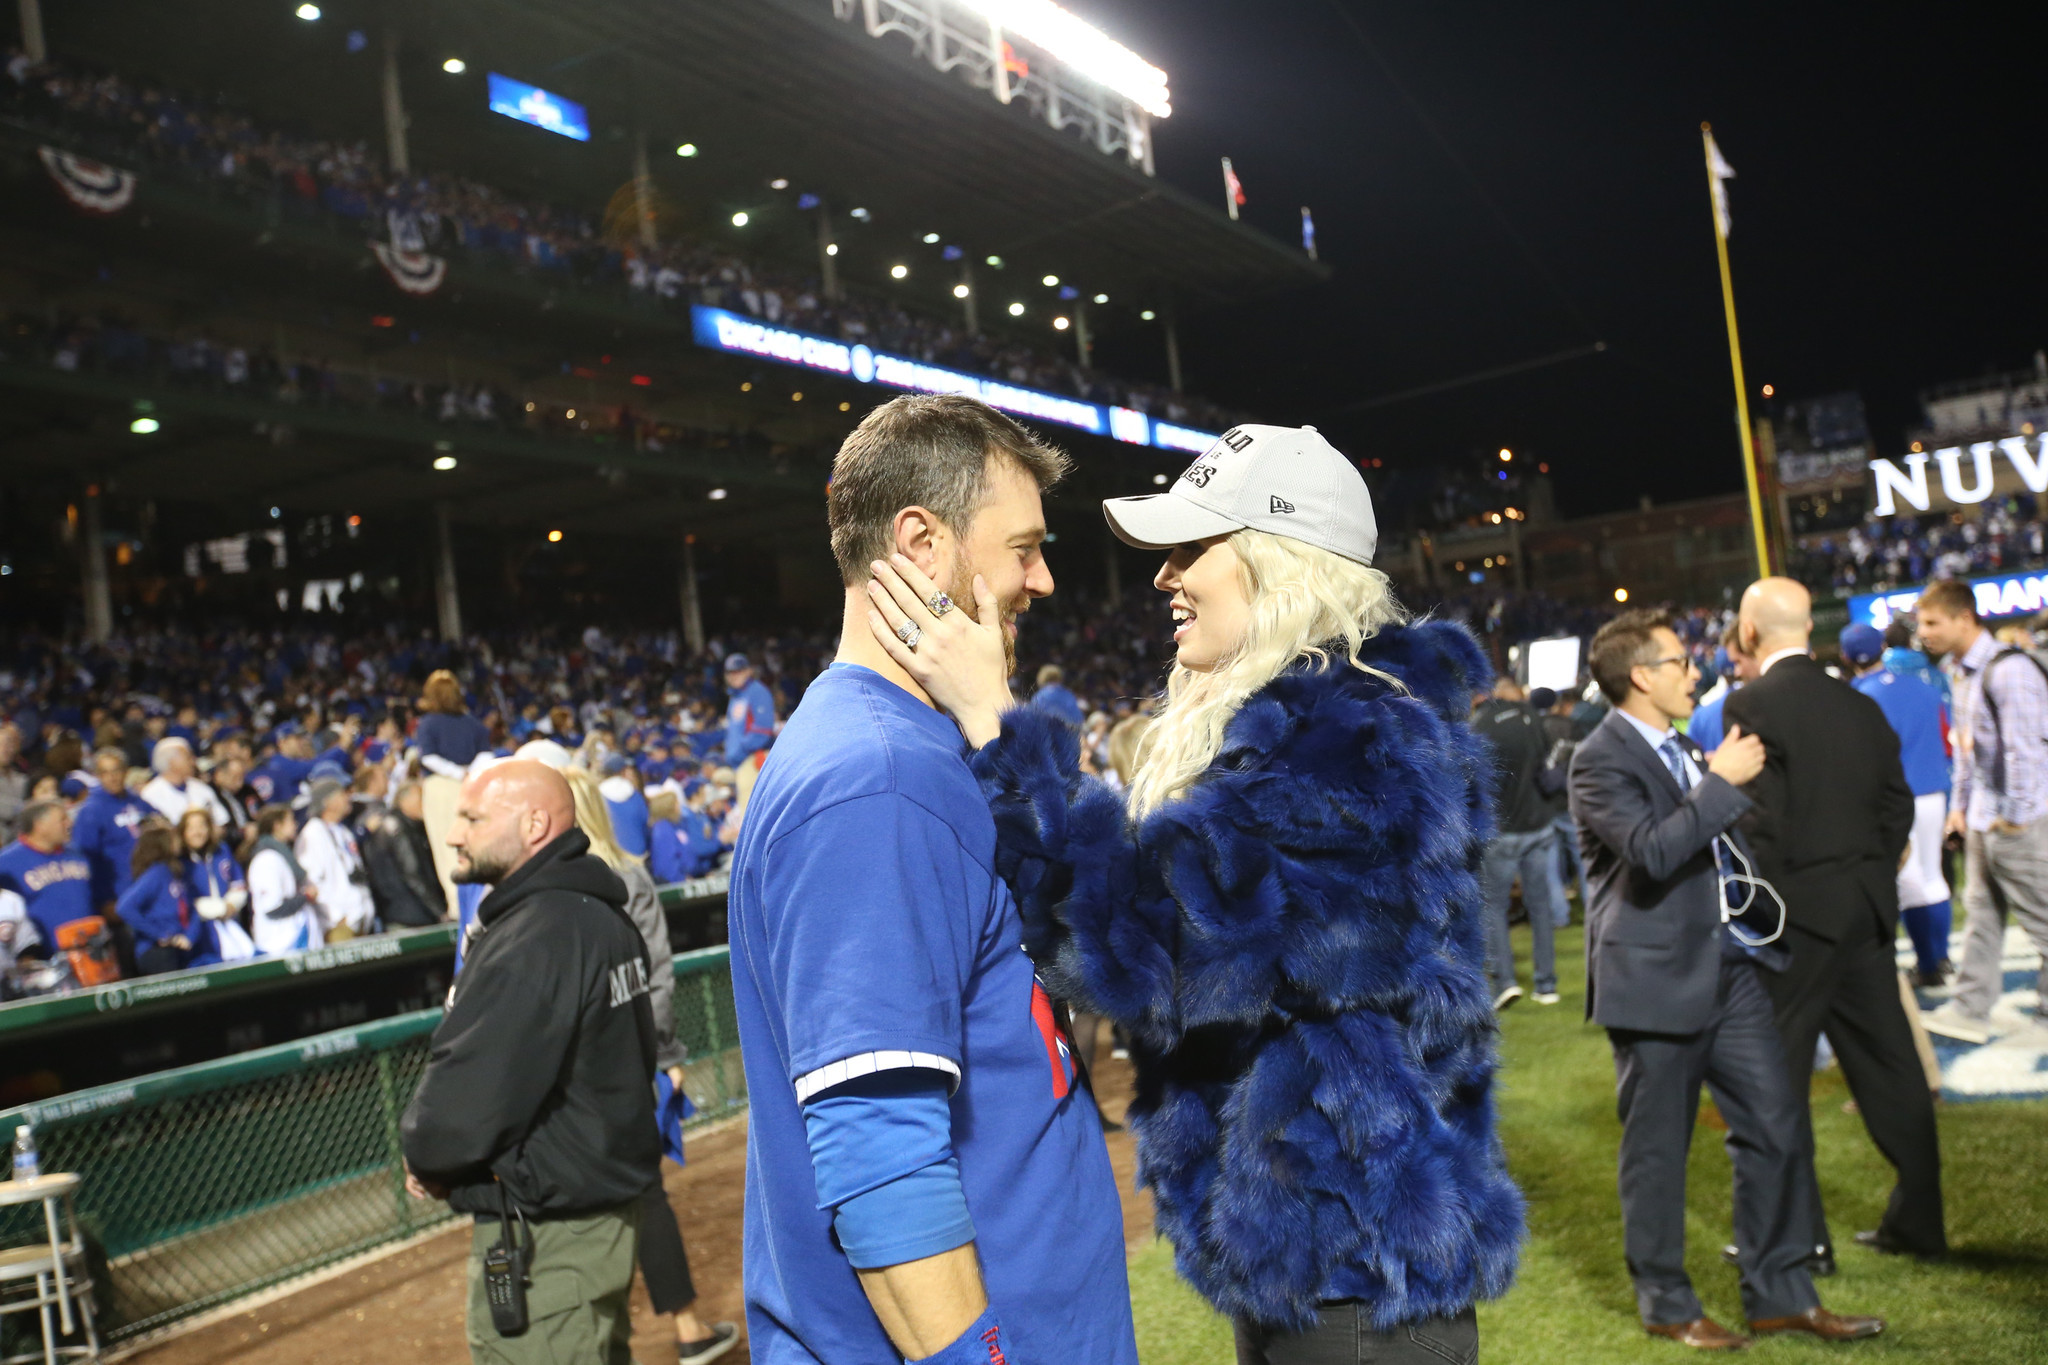 Ben and Julianna Zobrist divorce trial: What to know